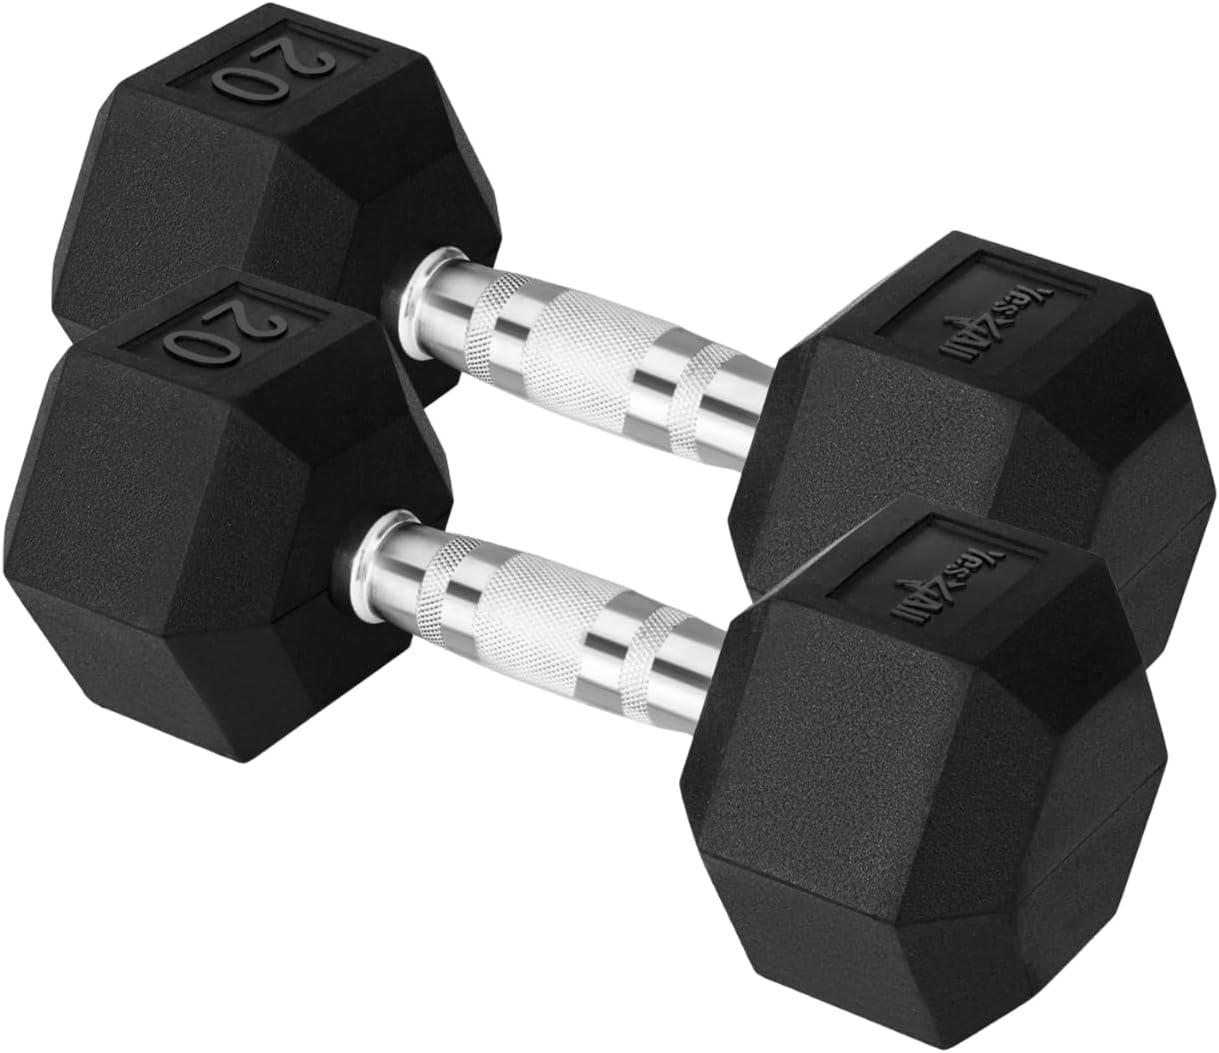 Yes4All Chrome Grip Encased Hex Dumbbells \u2013 Hand Weights With Anti-Slip 10-30 LBS Pair